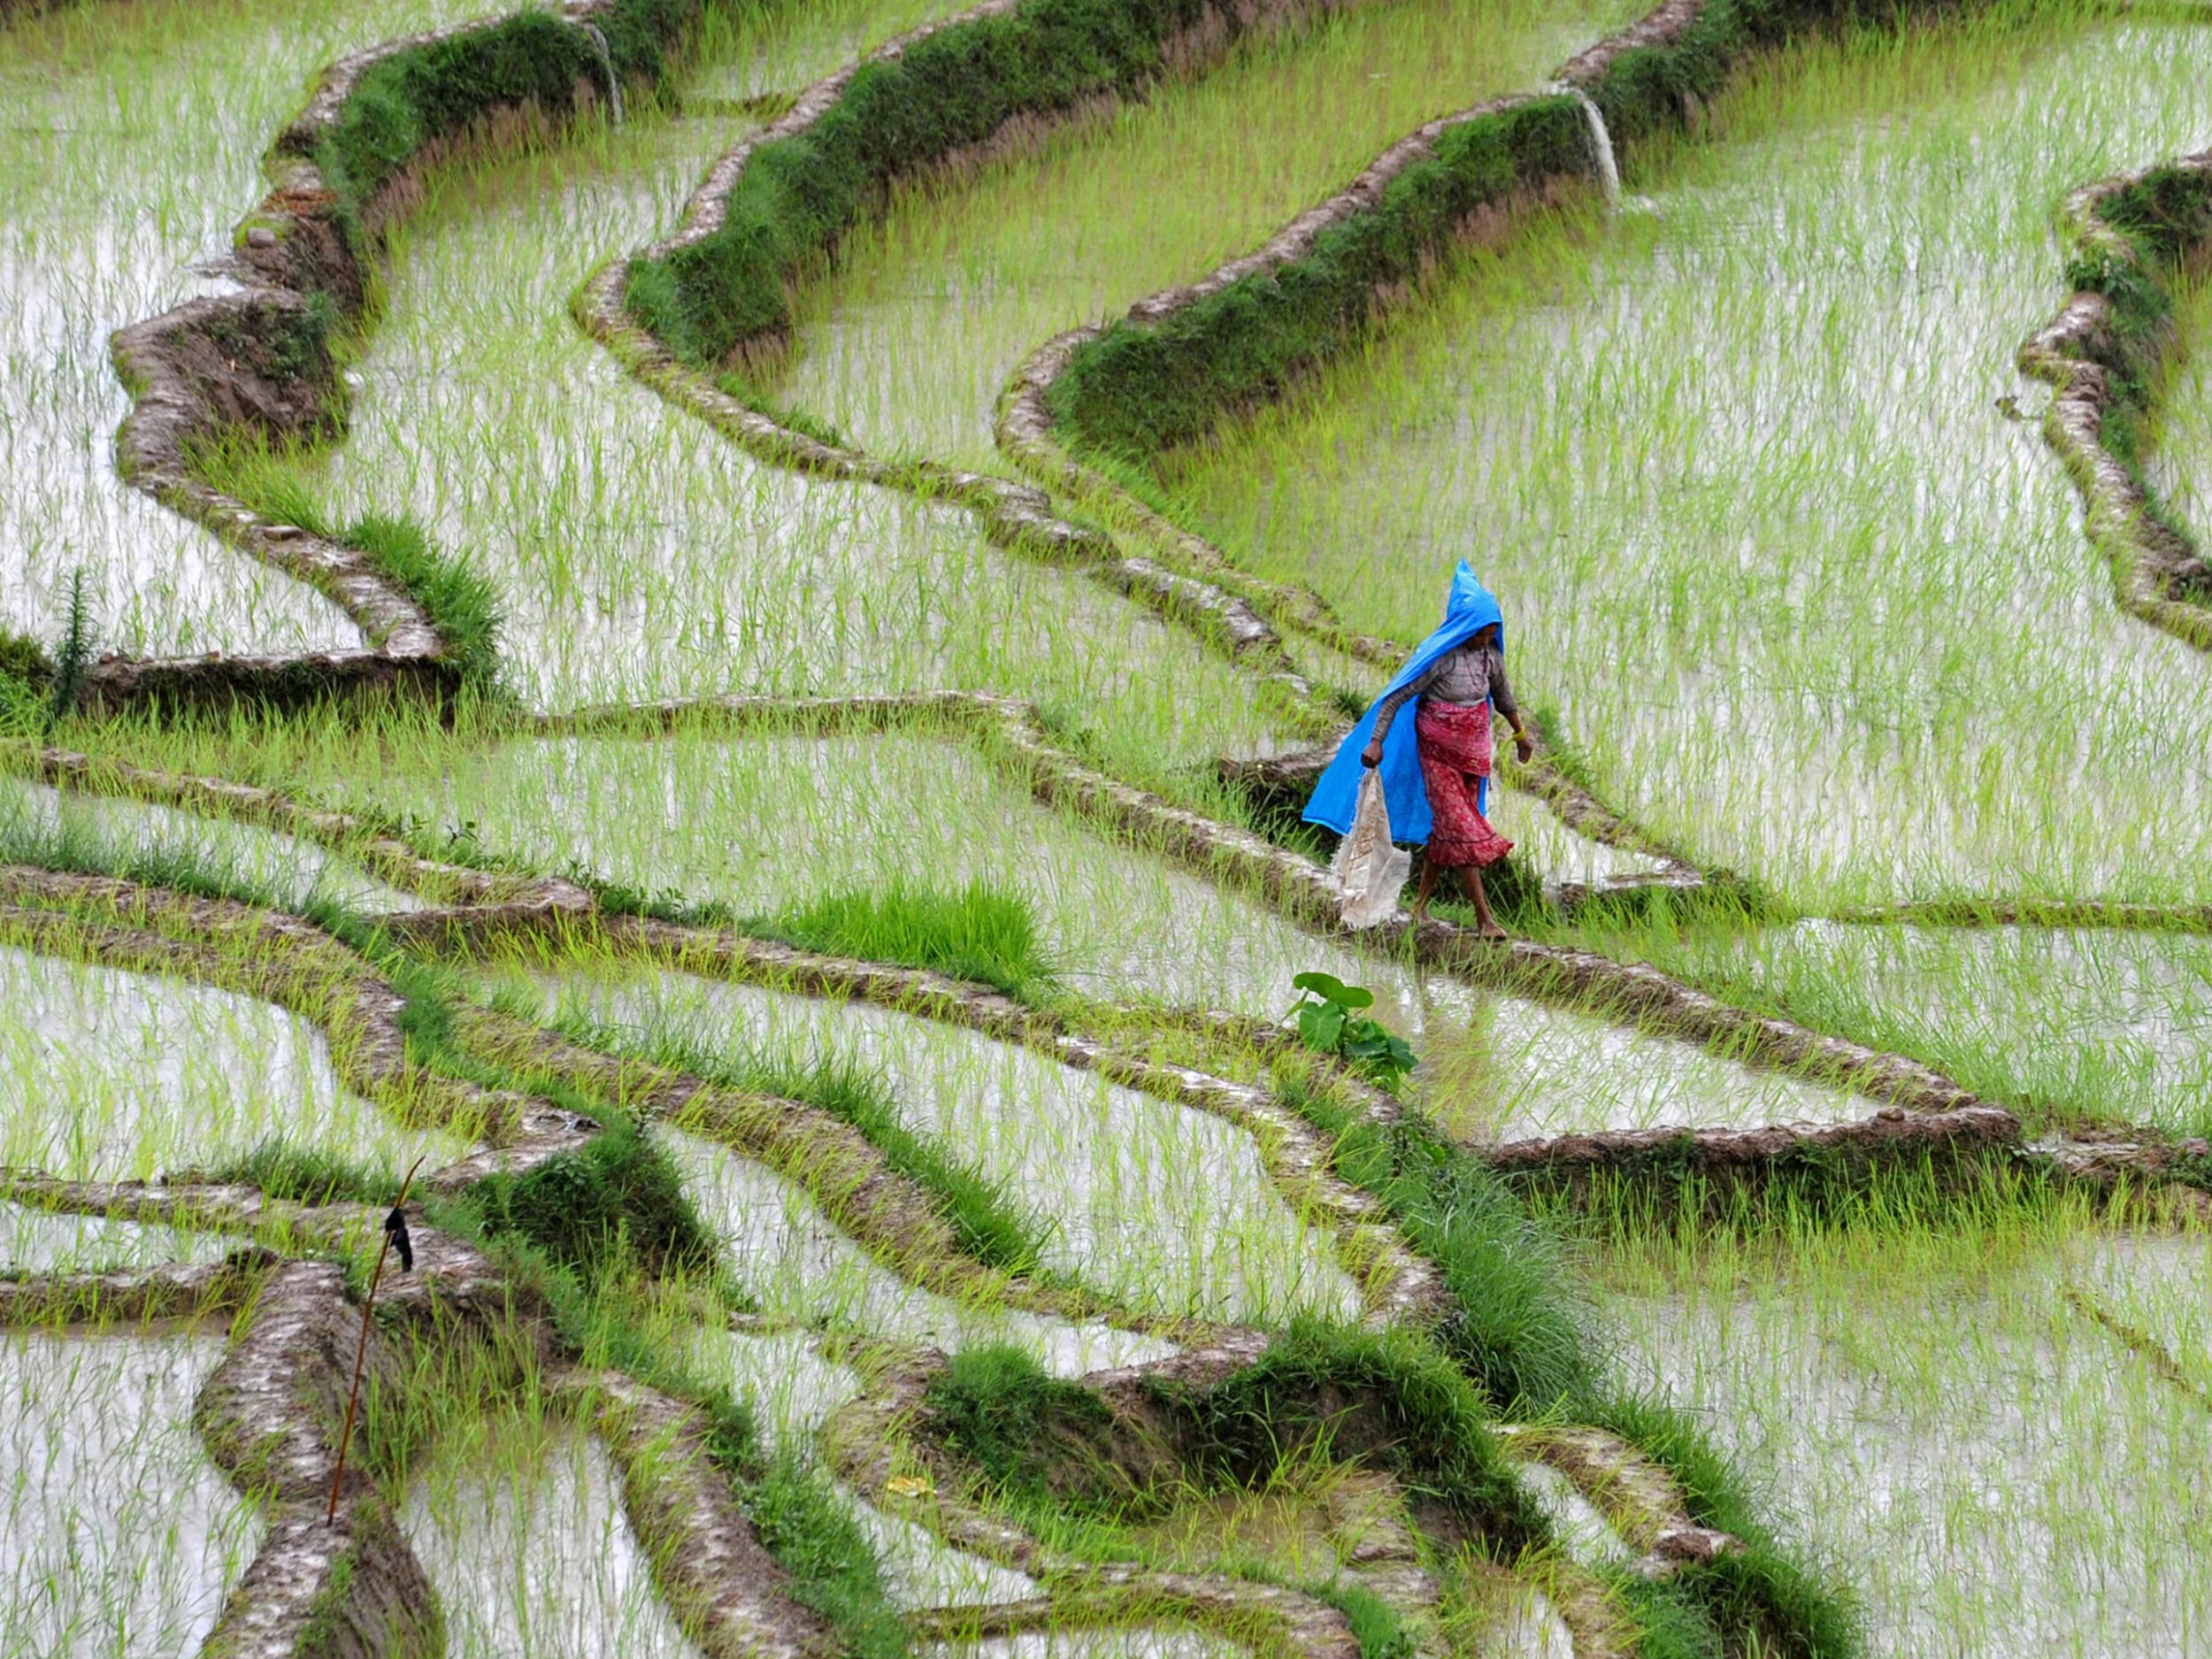 Rice is the primary source of food for two billion people, and is particularly important in parts of Asia